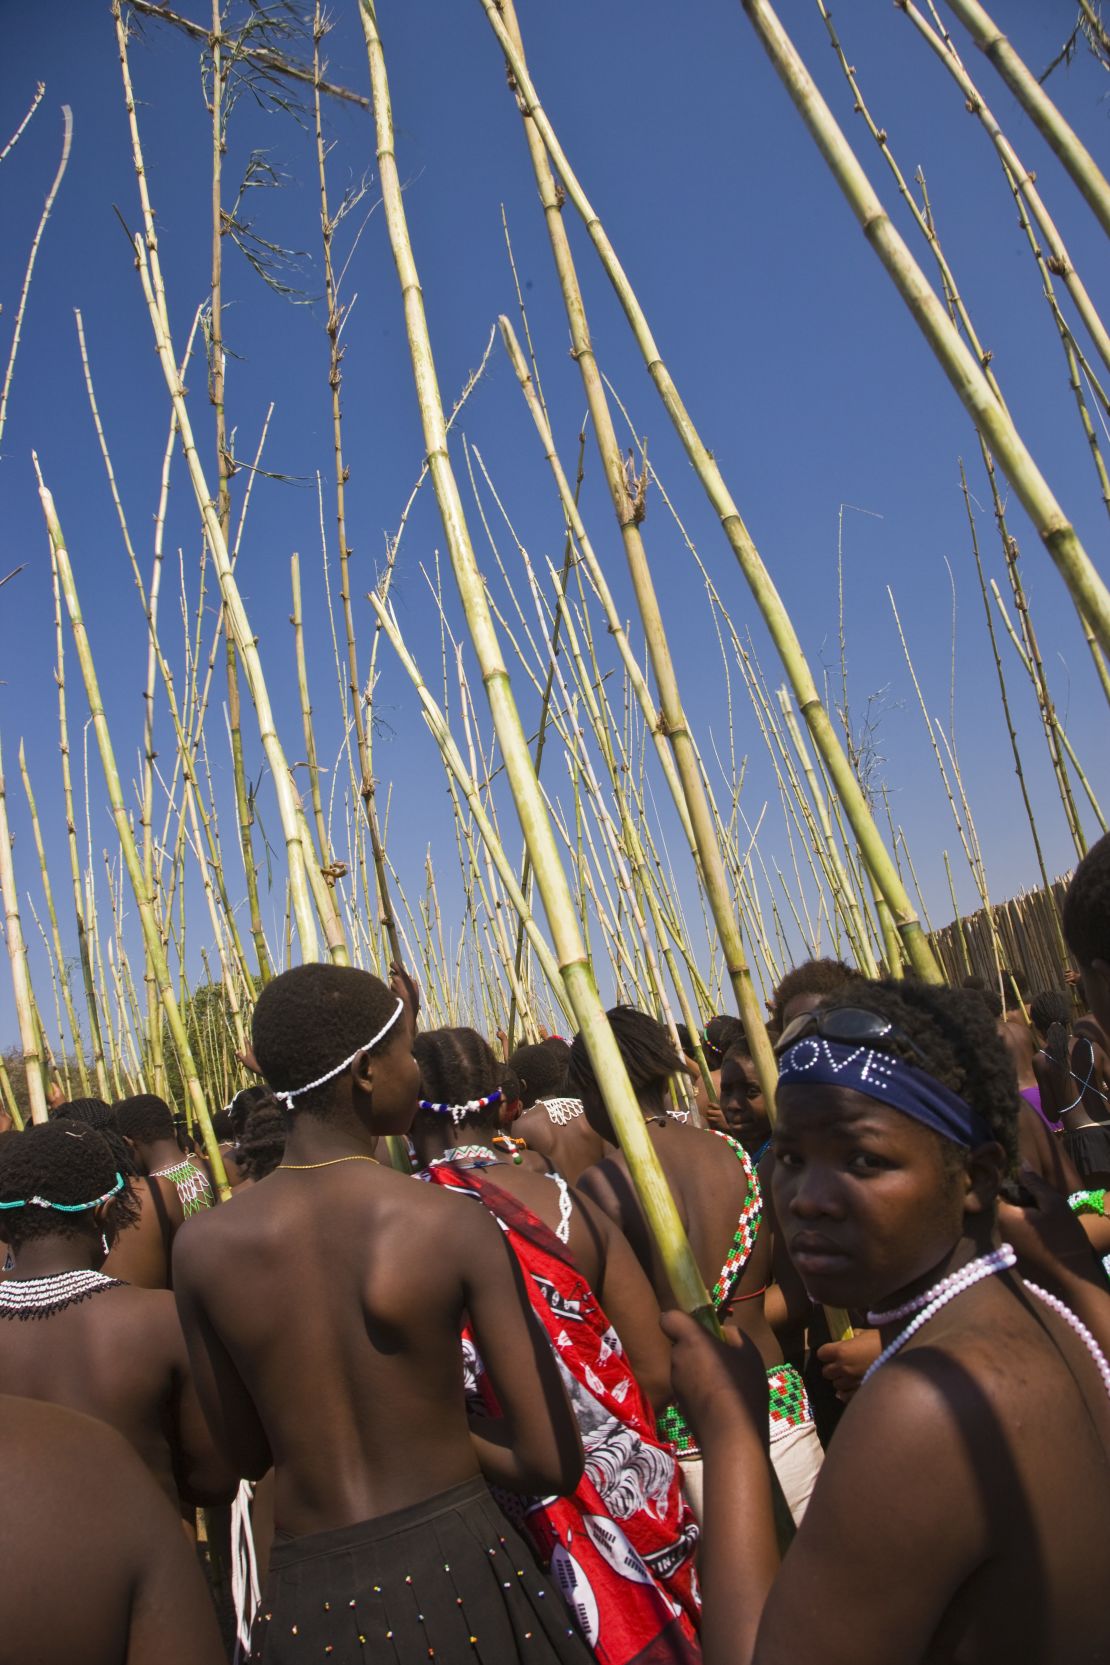 A group of Zulu women carry reeds to the royal palace during the annual reed-dance ceremony.